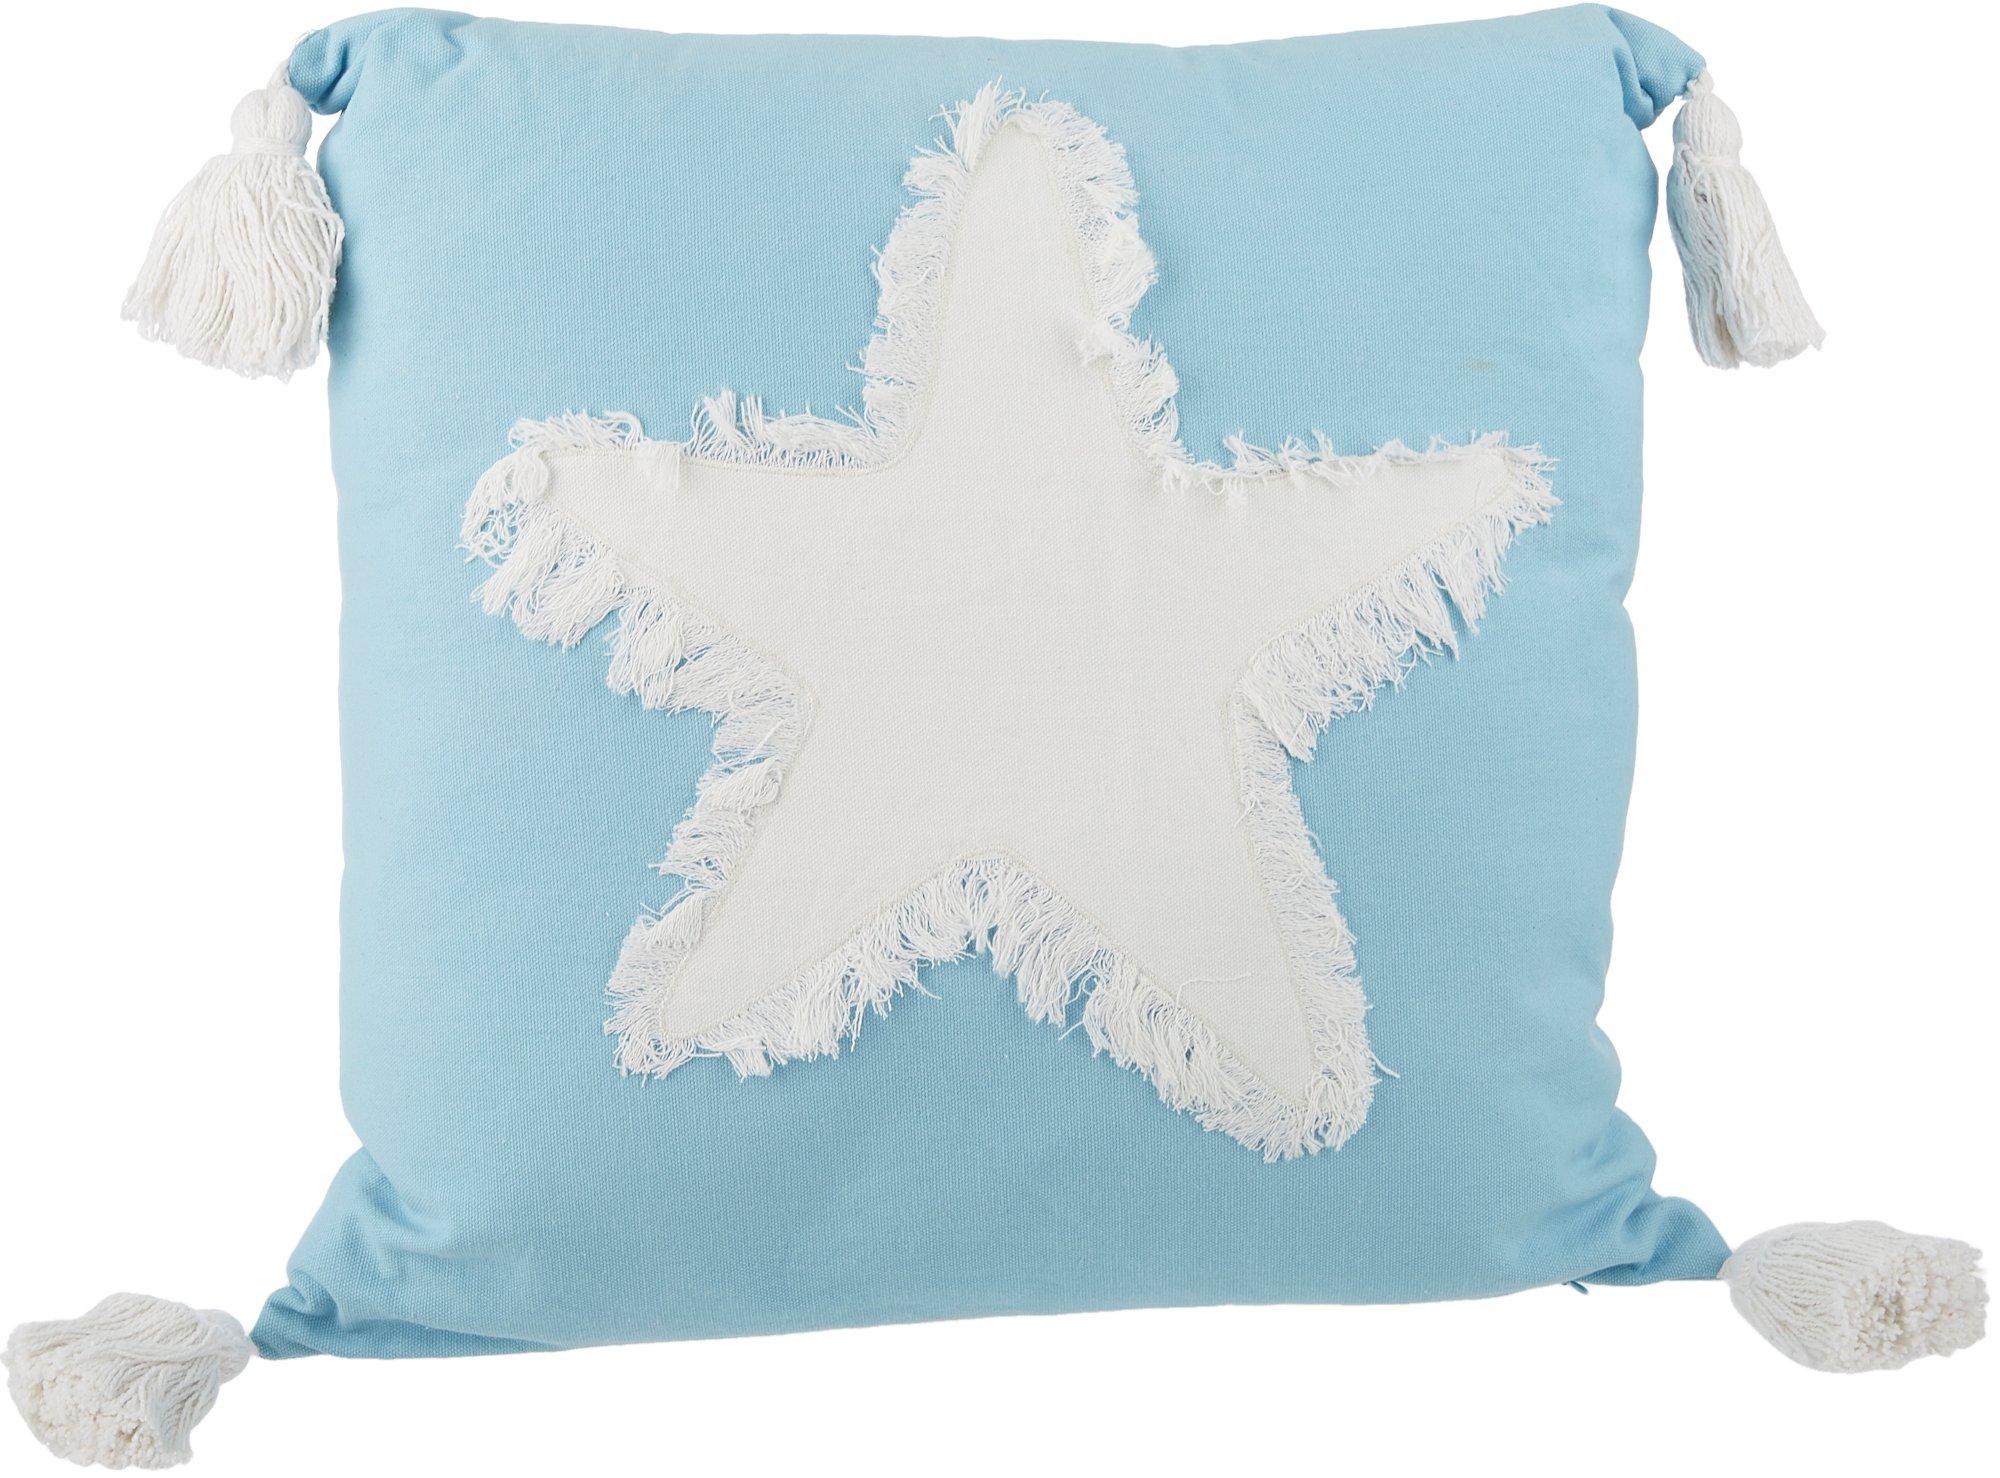 INK+IVY Kiran Embroidered Oblong Pillow in Blue